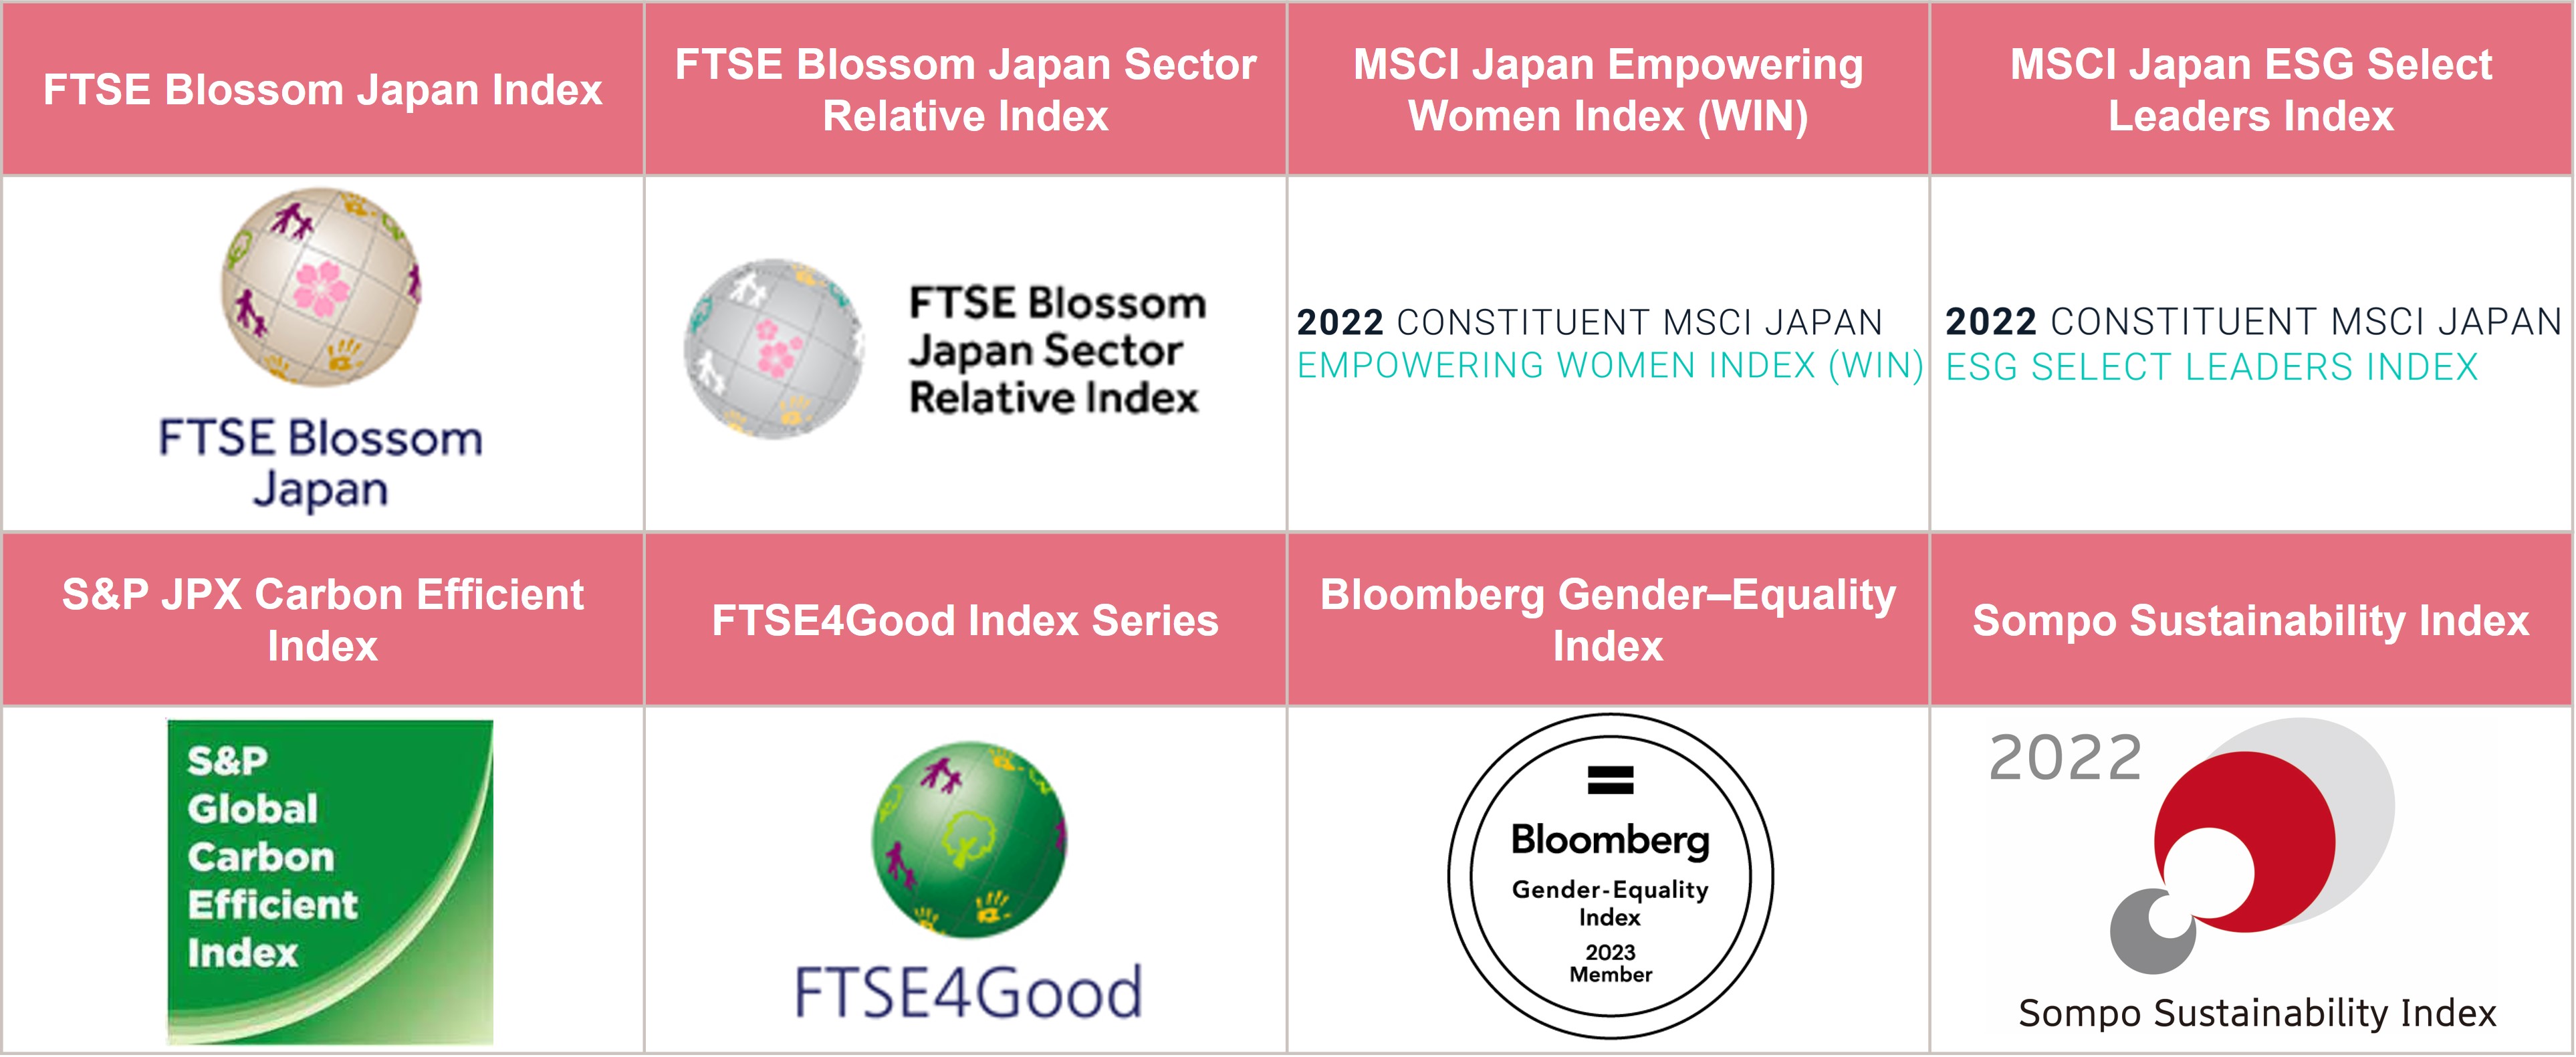 New elements of the ESG Index